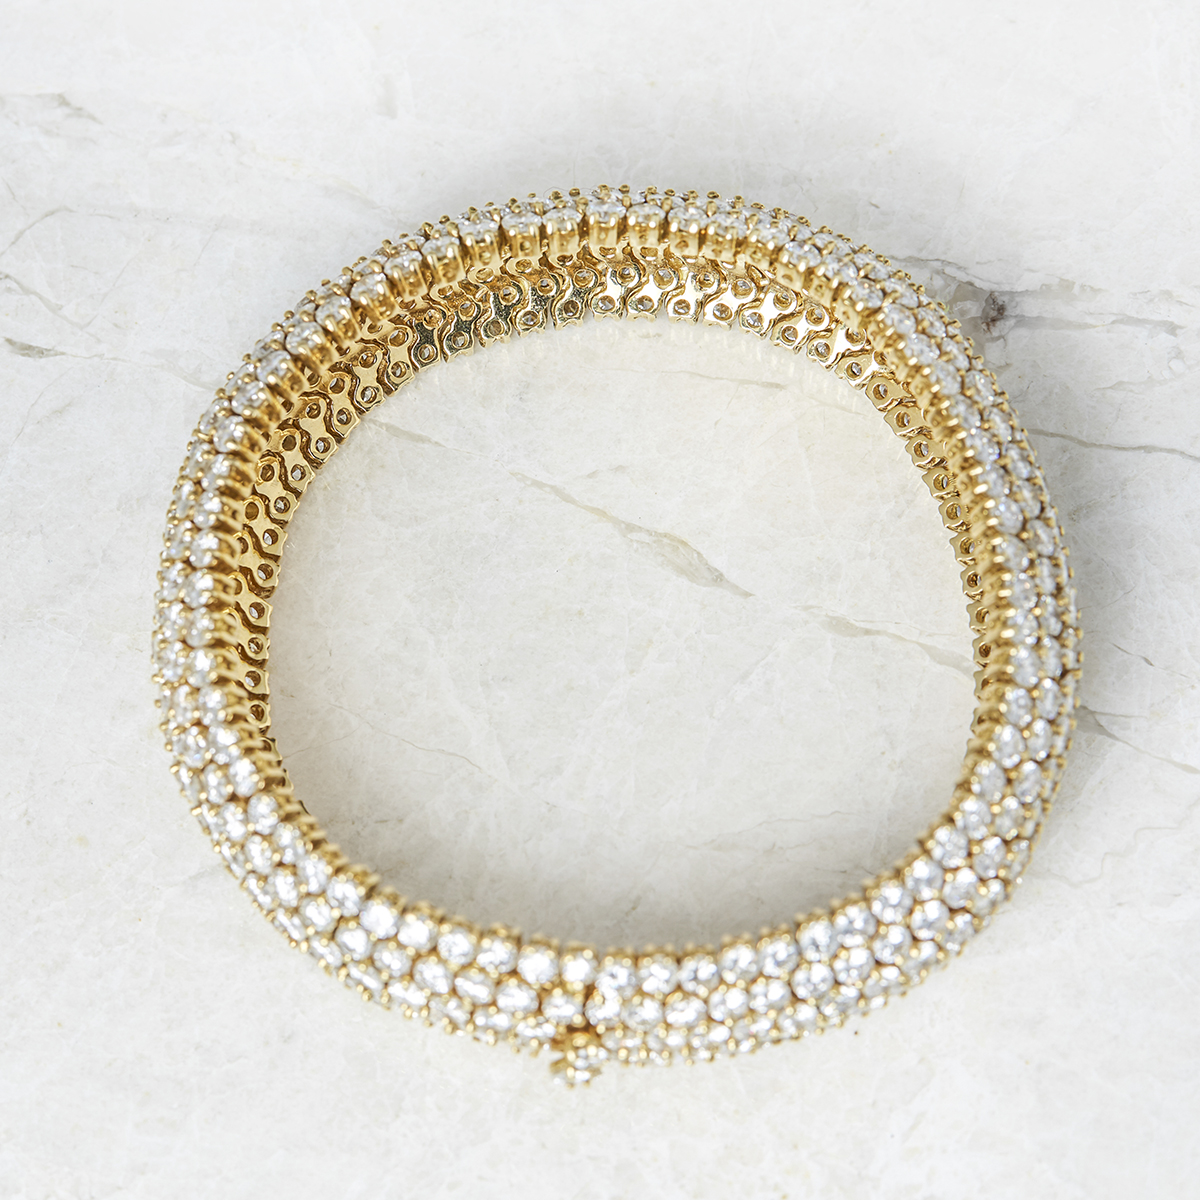 Unbranded, 18k Yellow Gold Round Brilliant Cut 49.00ct Diamond Cluster Bracelet - Image 8 of 8